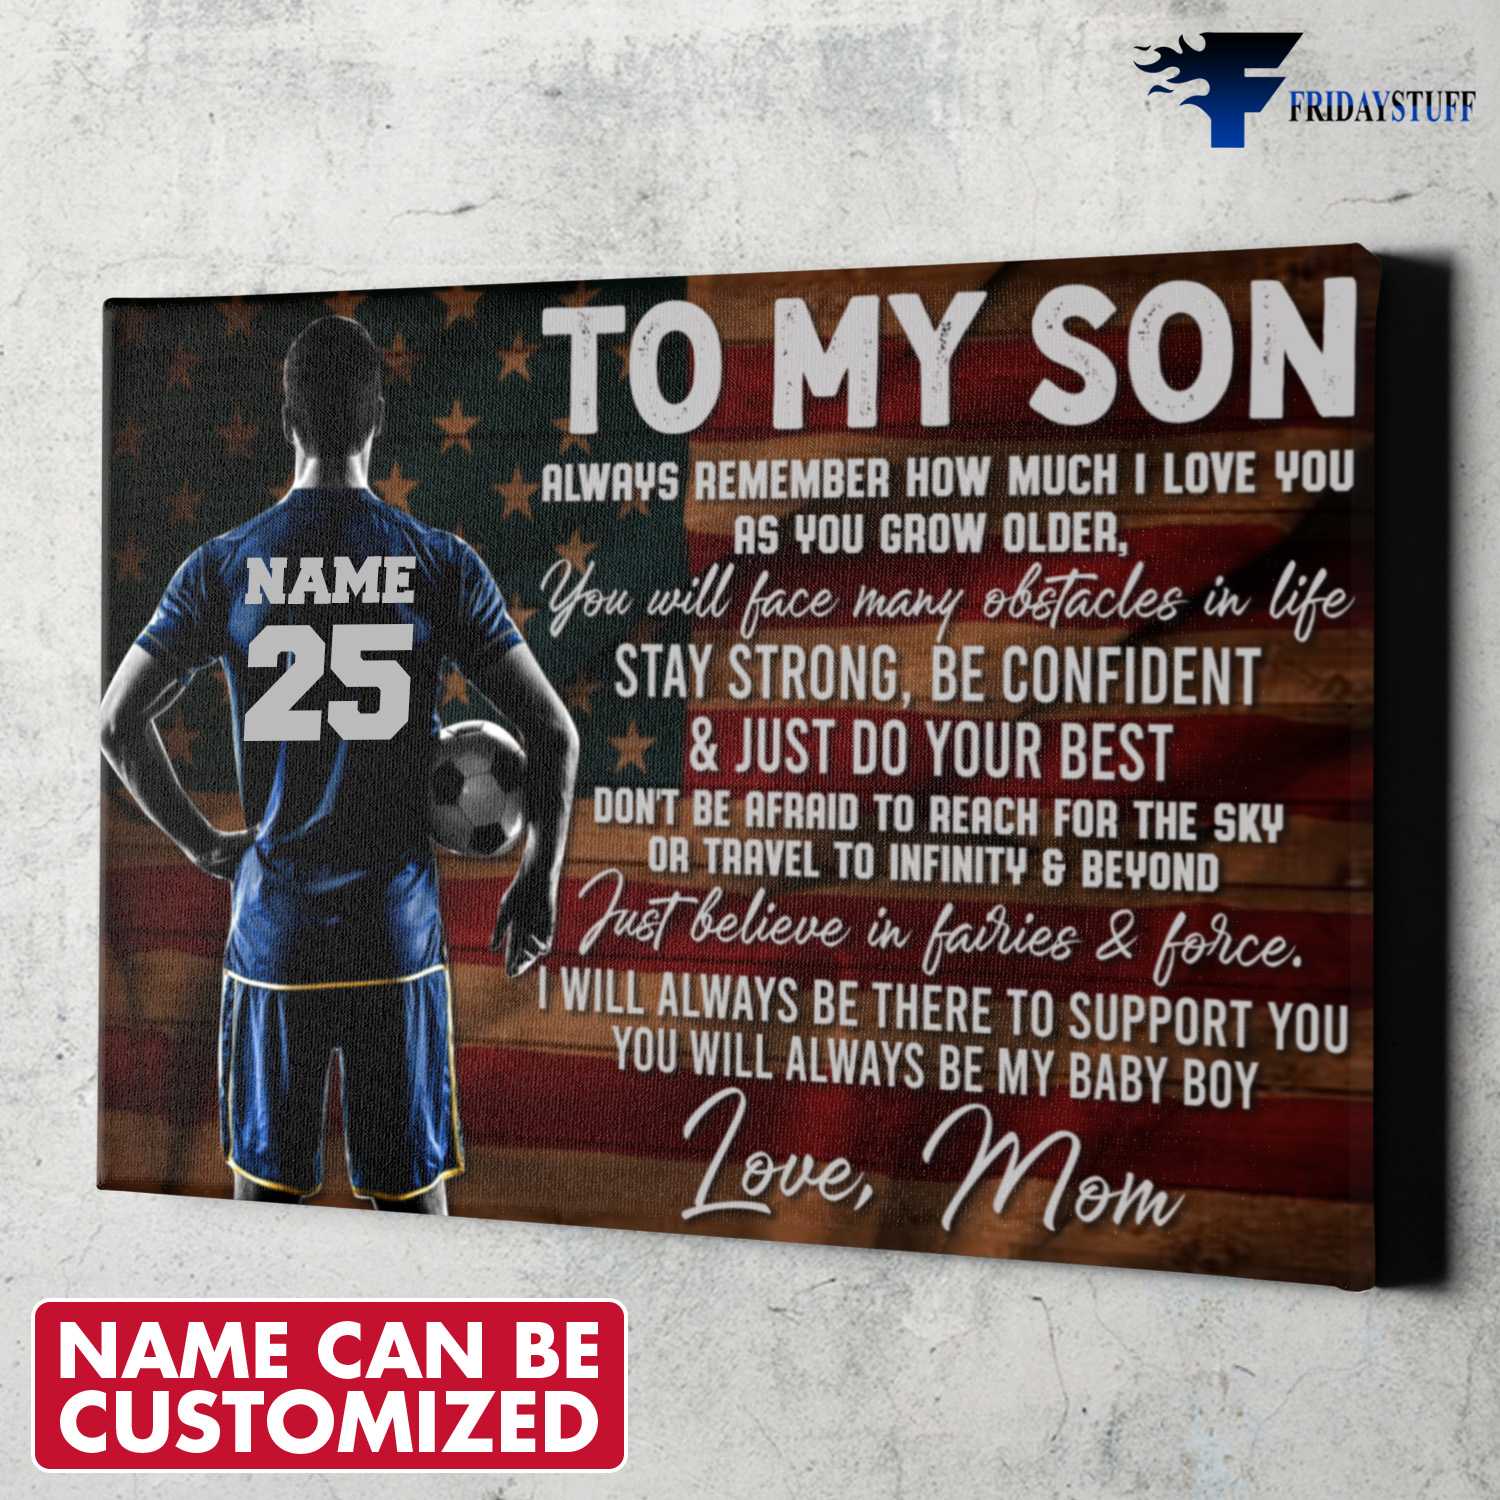 Soccer Player, Mom And Son, To My Son, Always Remember How Much I Love You, As You Grow Older, You Will Face Many Onstacles In Life, Stay Strong, Be Confident, And Just Do Your Best